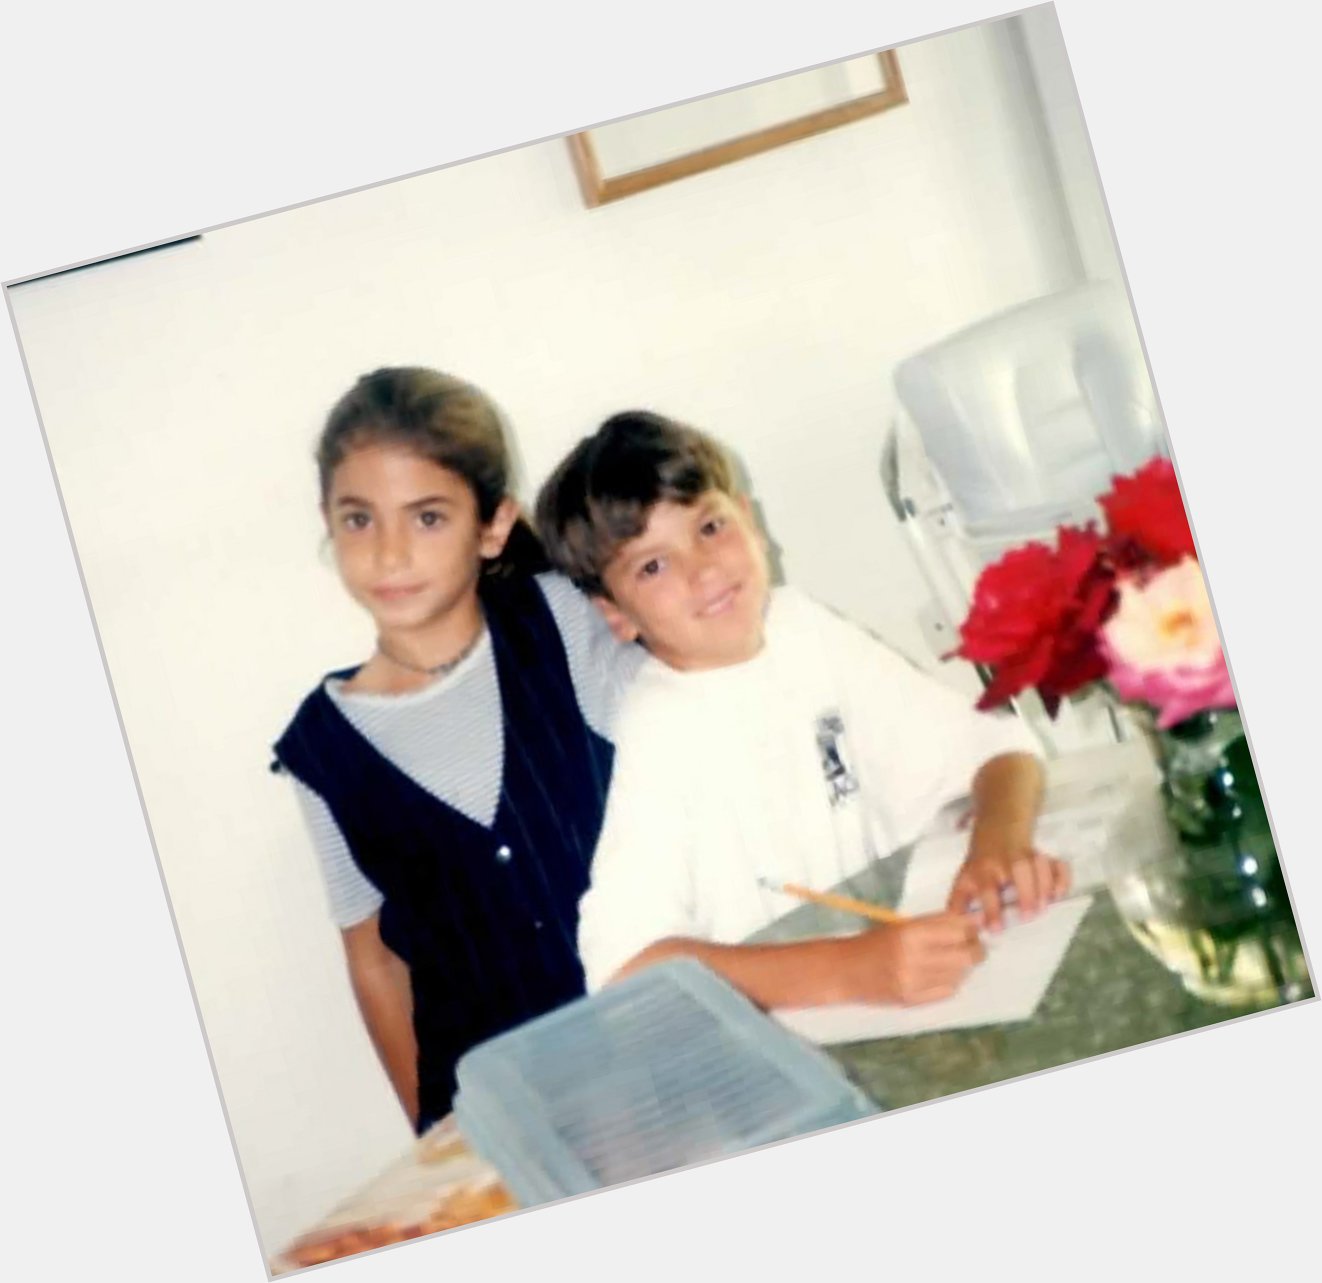 LITTLE NIKKI   HAPPY BIRTHDAY NIKKI REED HAVE PERFECT YEARS WITH YOUR BEAUTIFUL FAMILY       